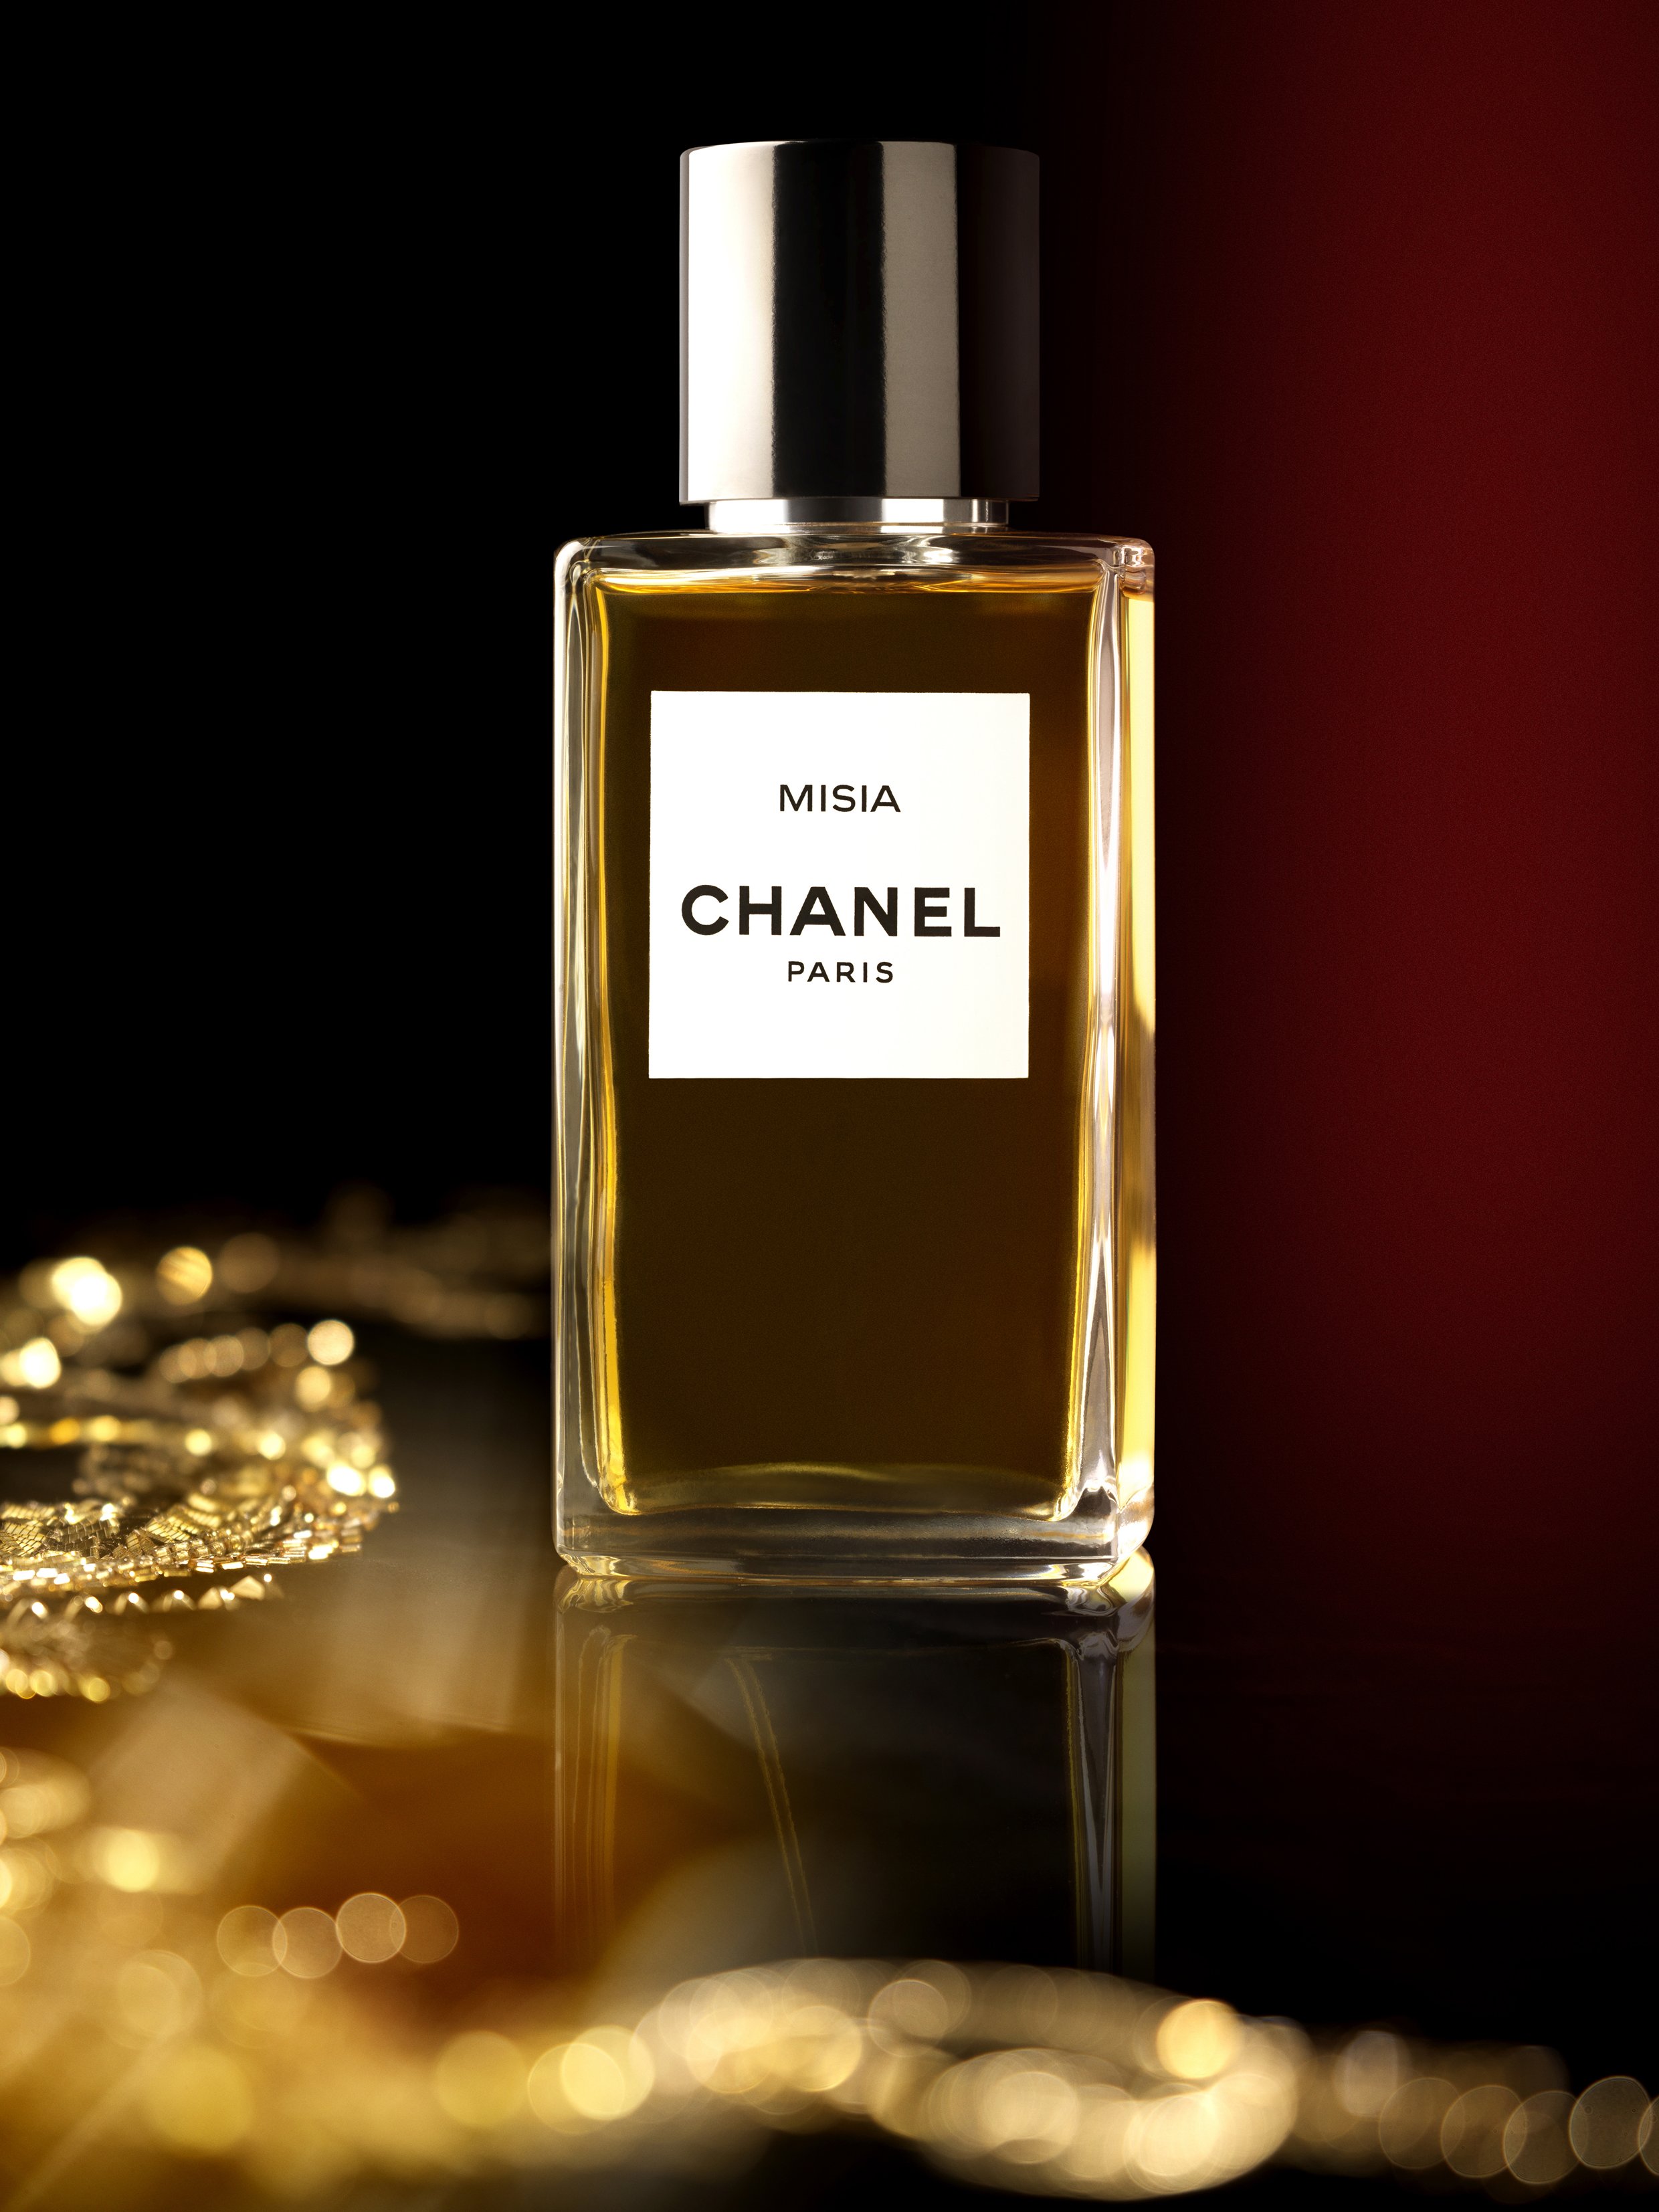 chanel misia review